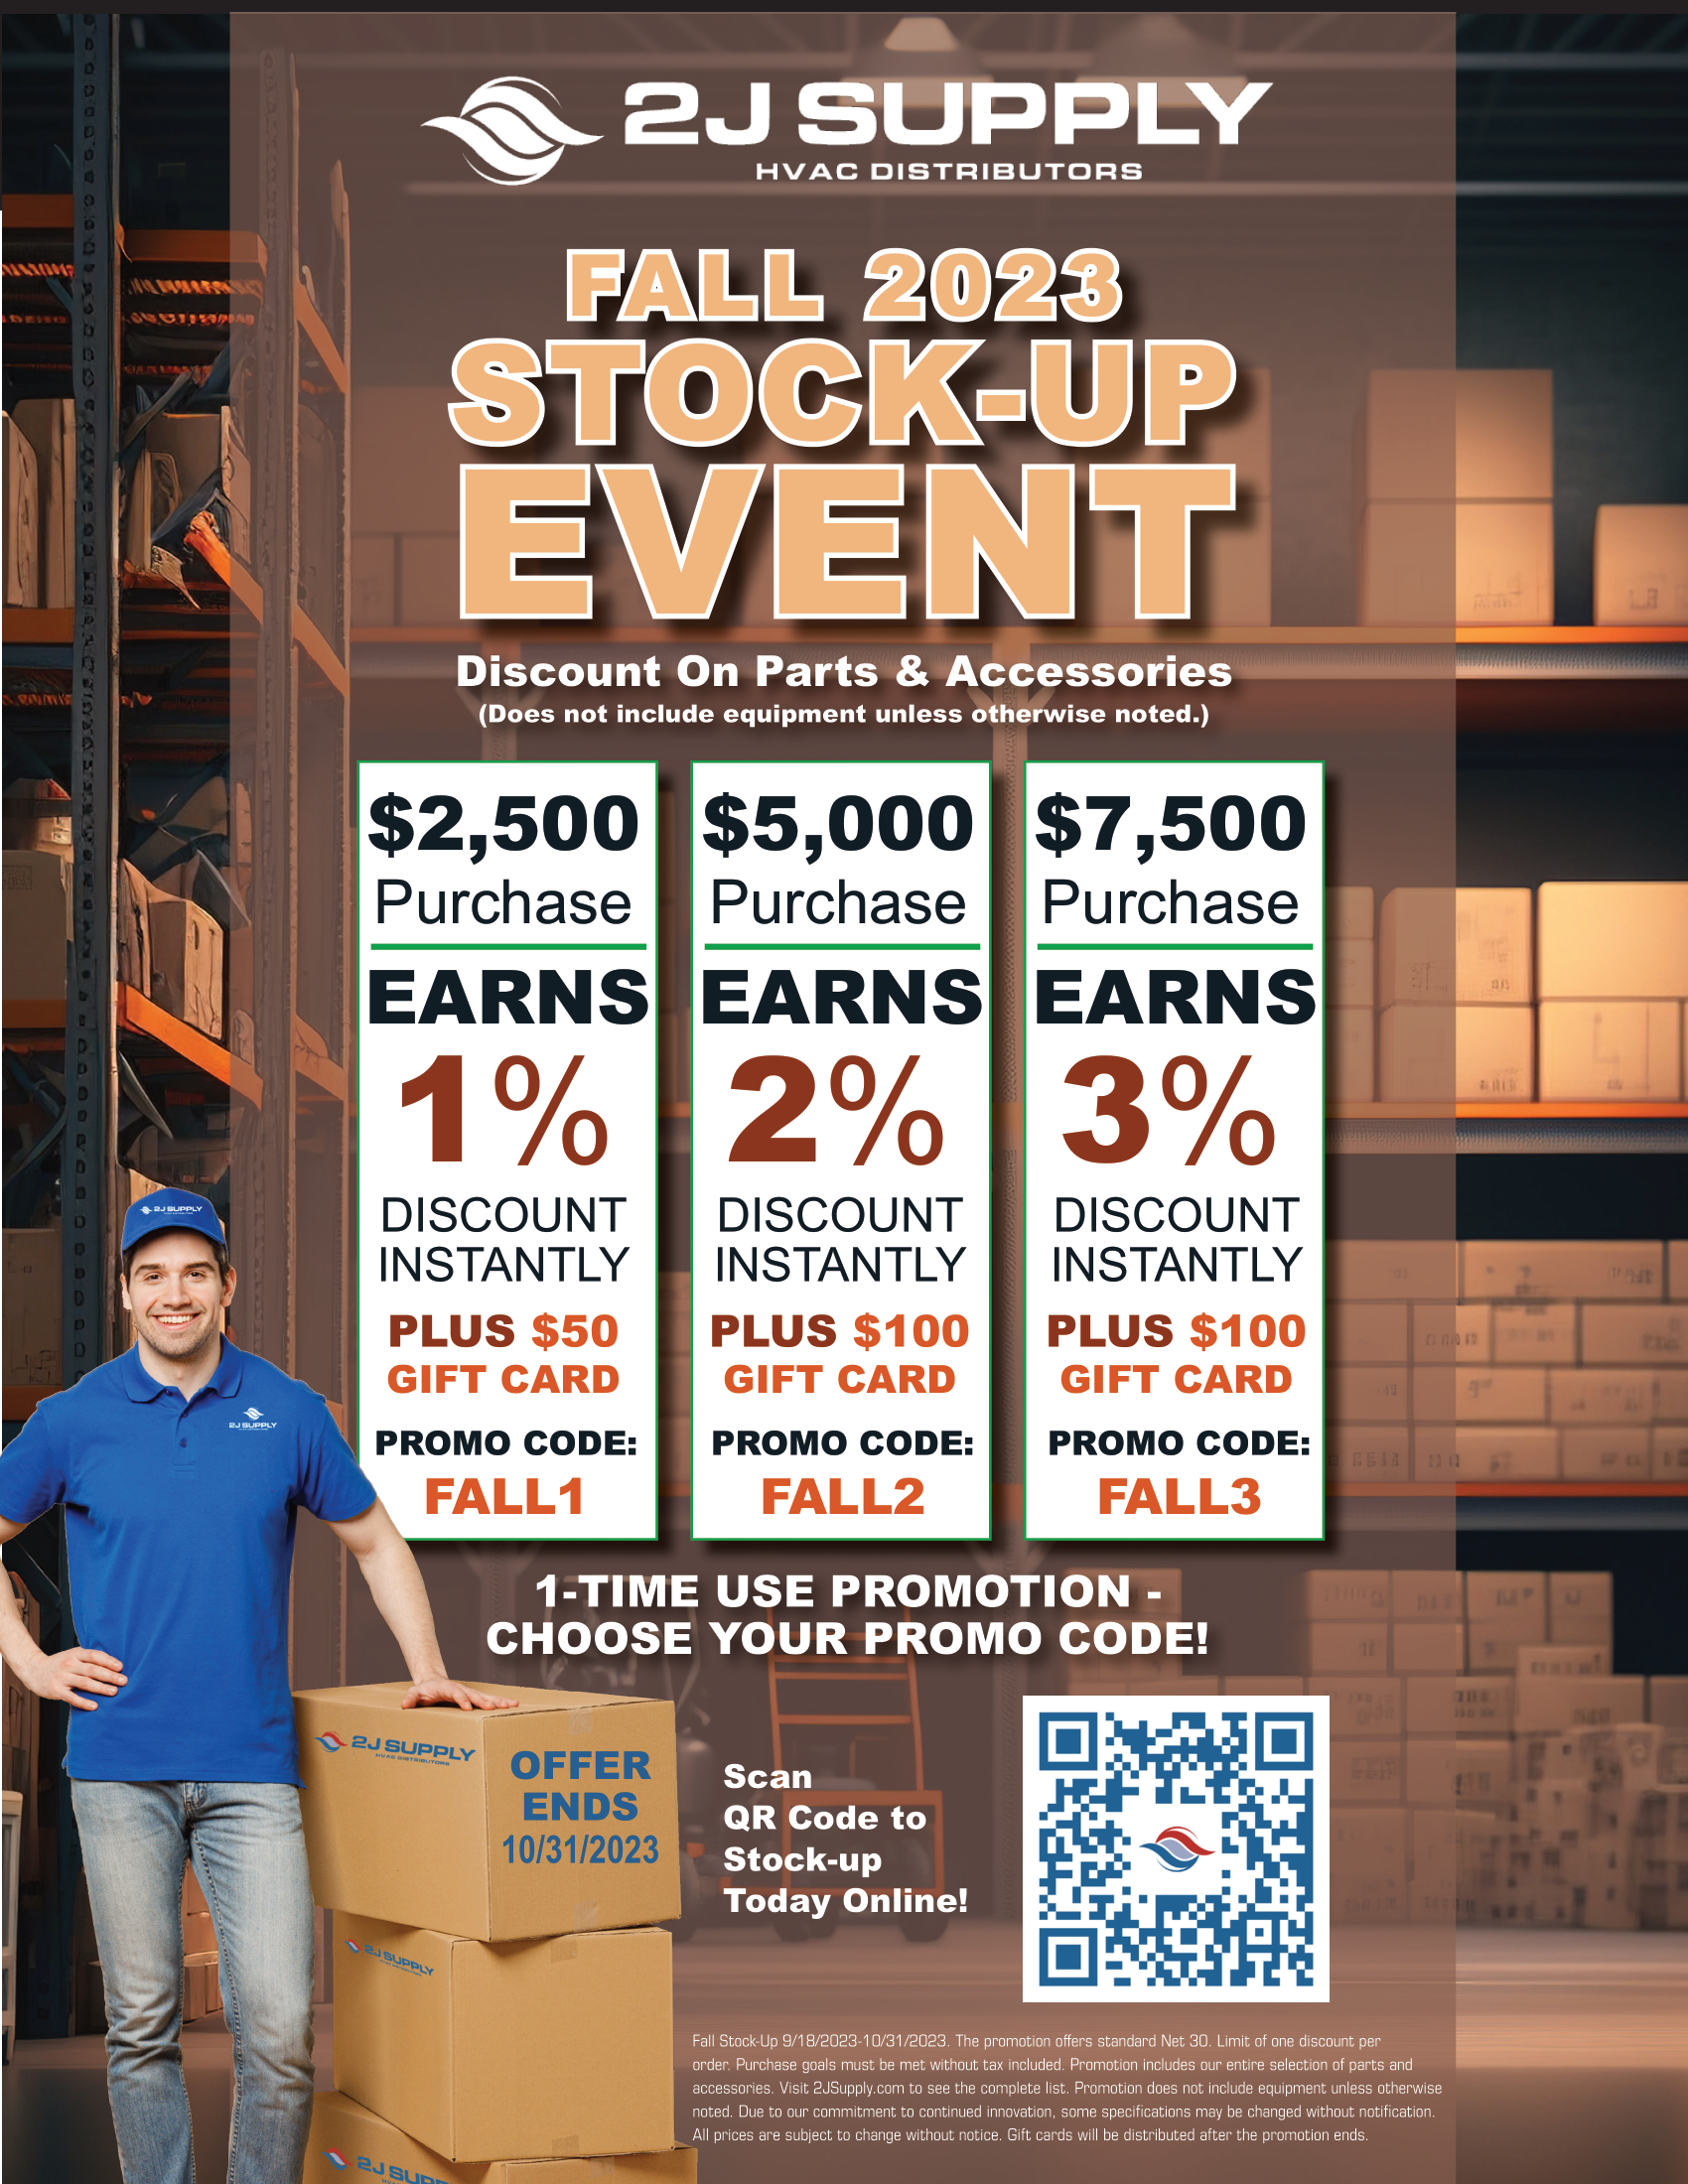 2J Supply Fall Stock Event